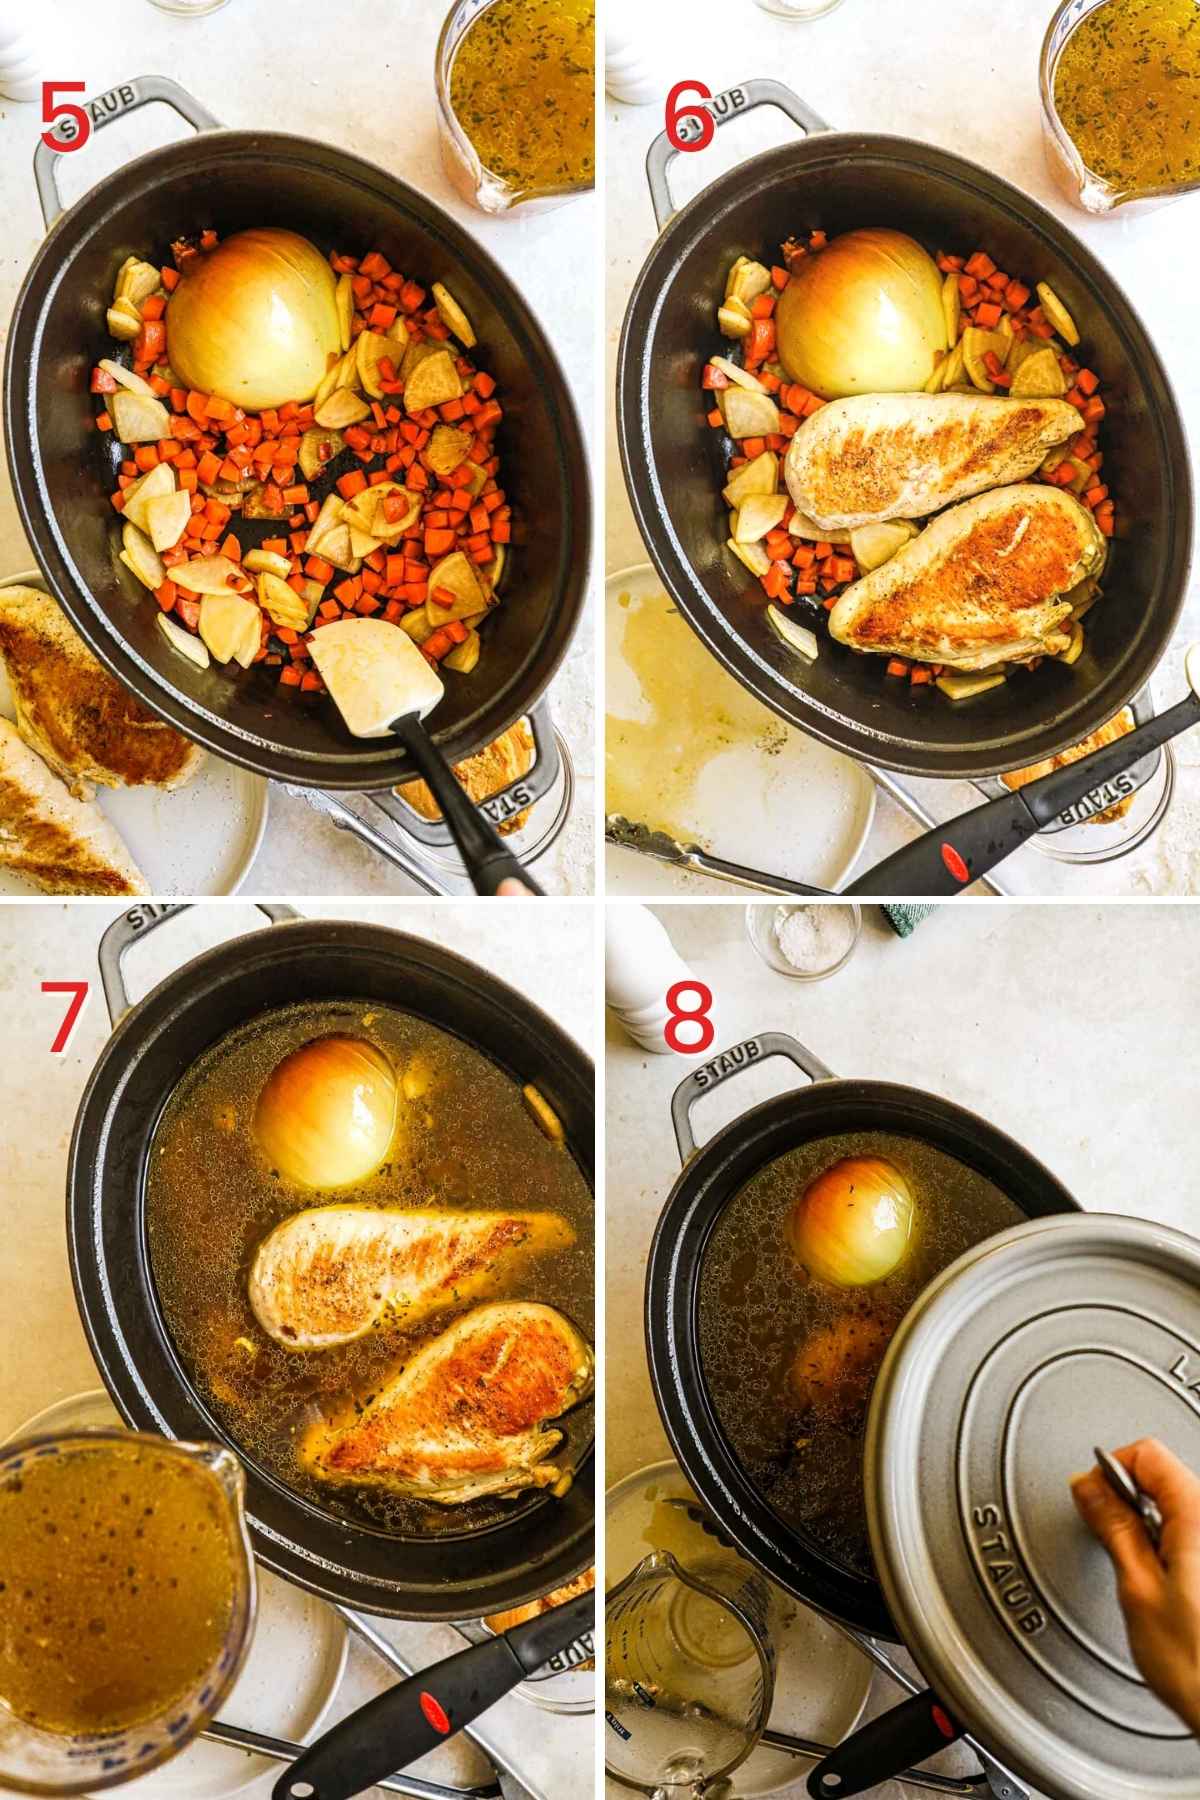 Steps to make easy chicken miso soup, including caramelizing the carrots, daikon, and onion, adding chicken to a pot, and deglazing the pot with homemade stock.